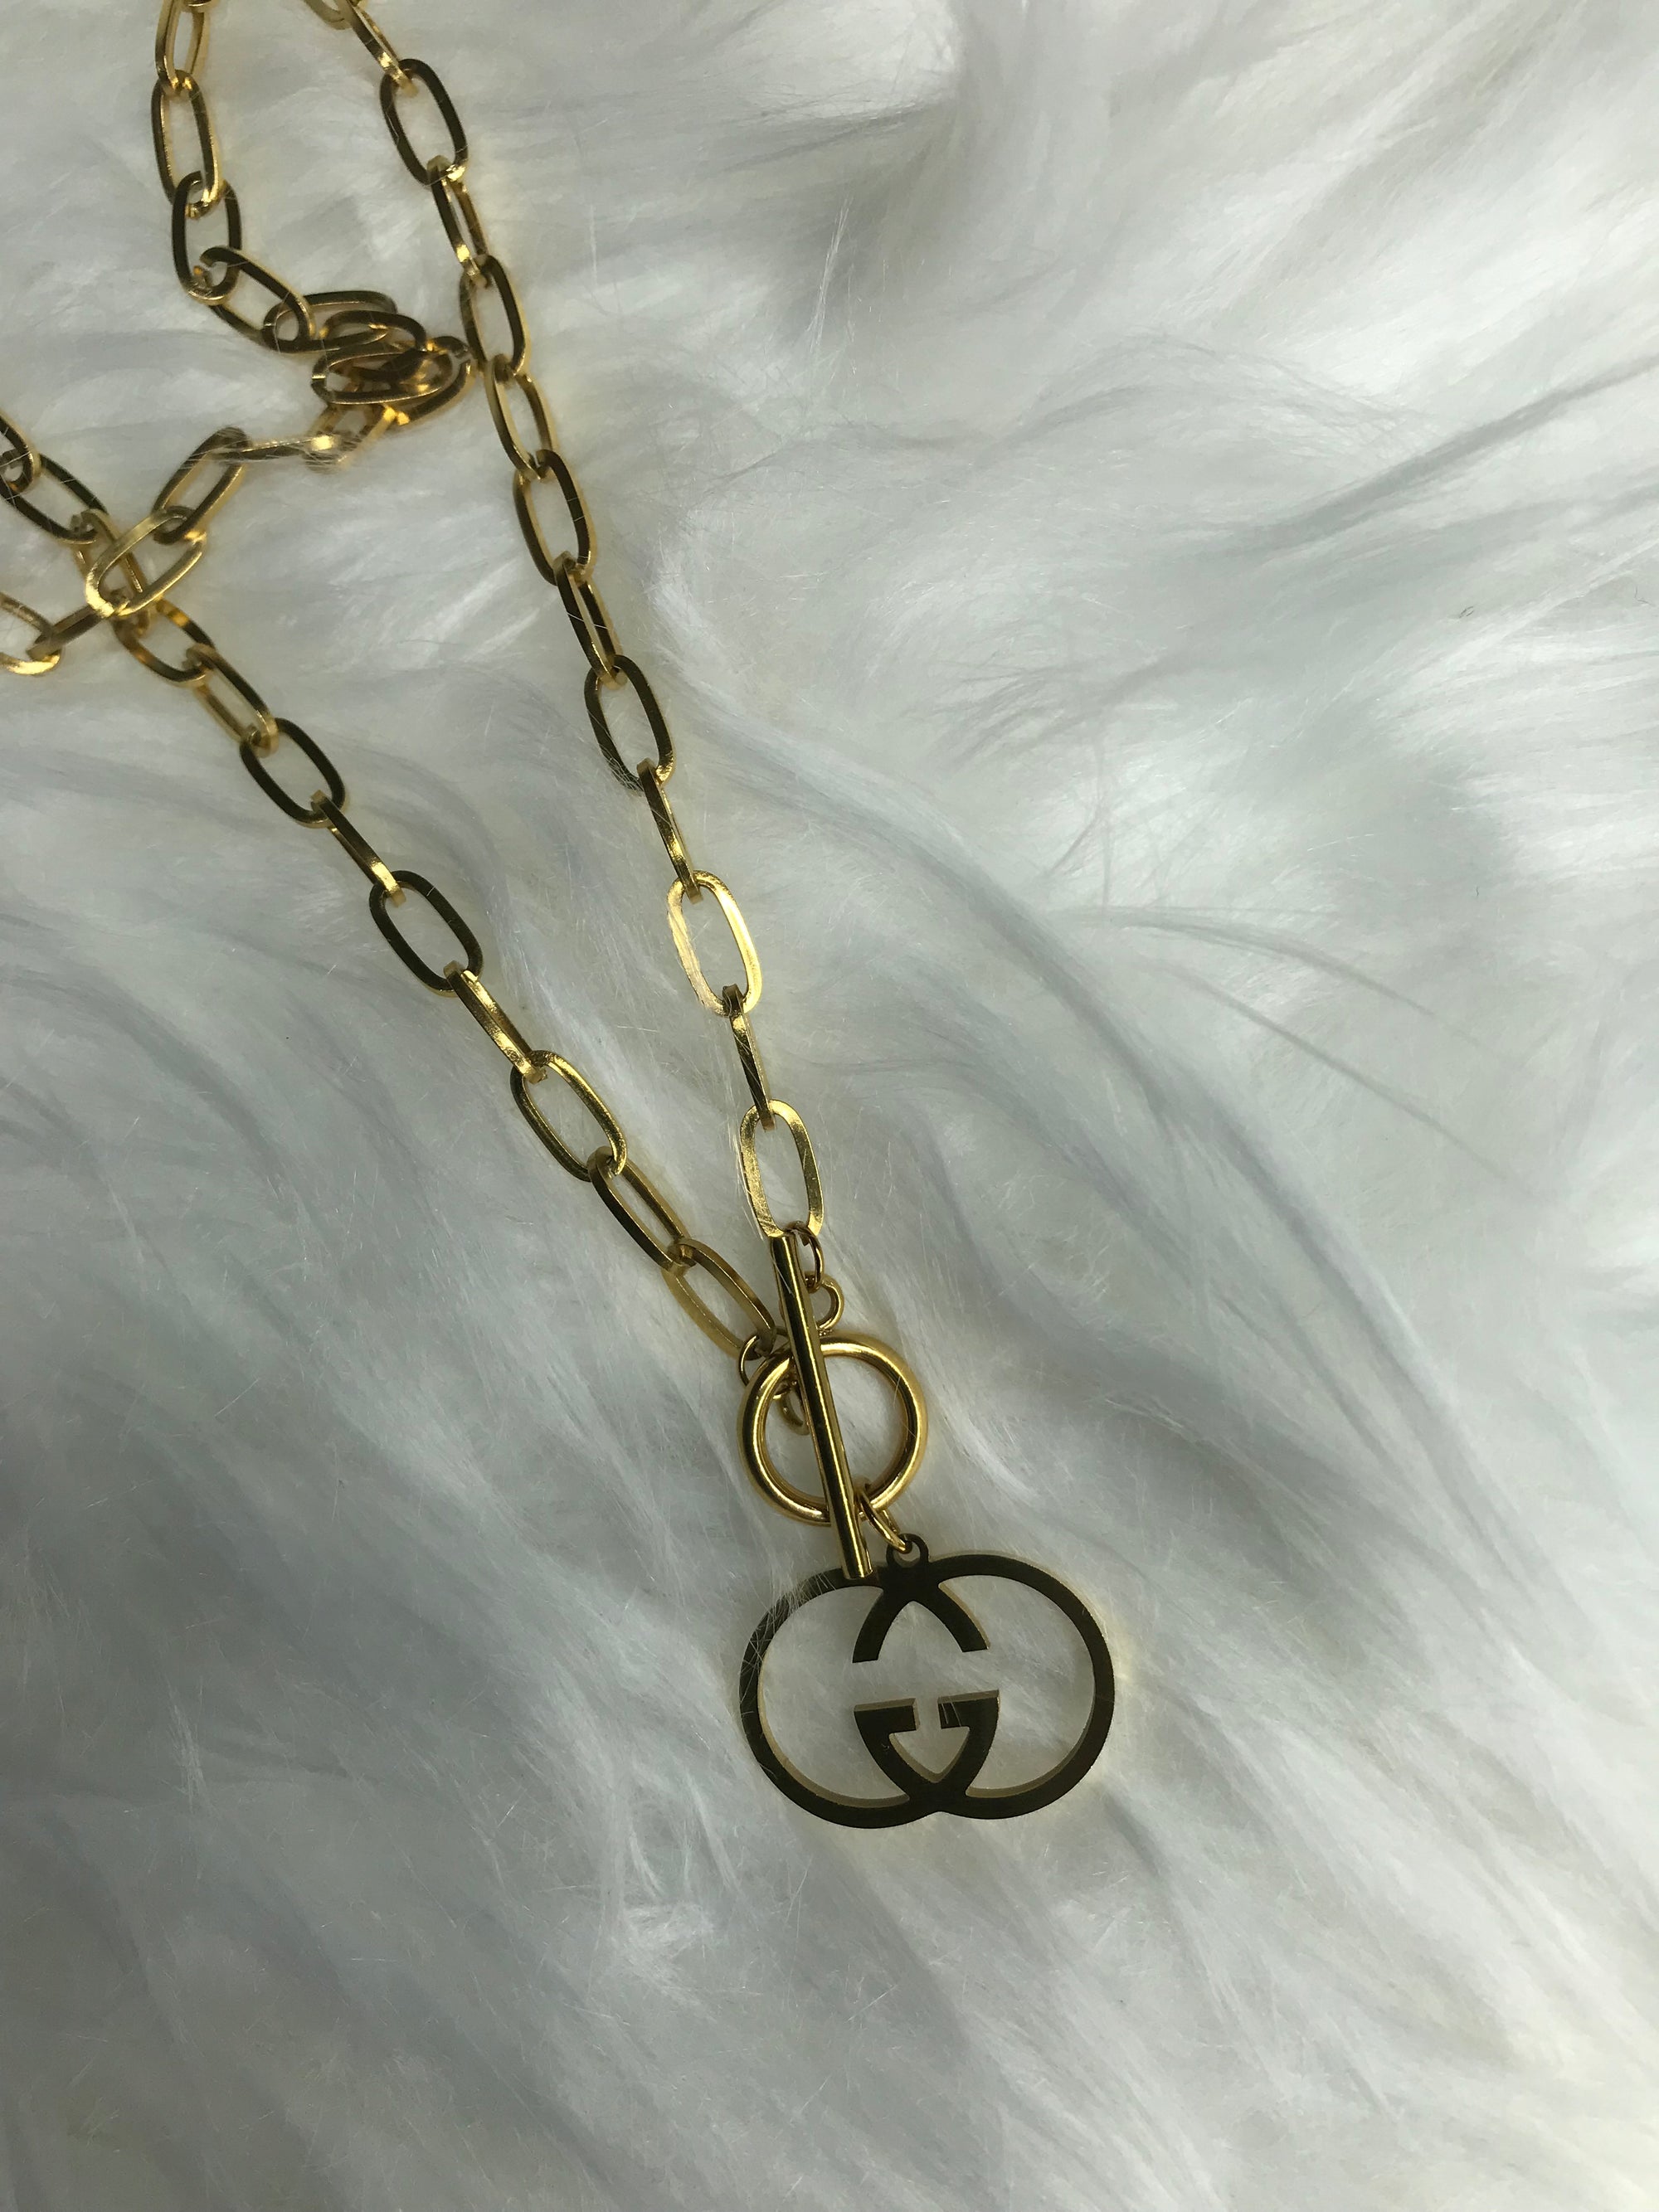 Repurposed Chanel Necklace